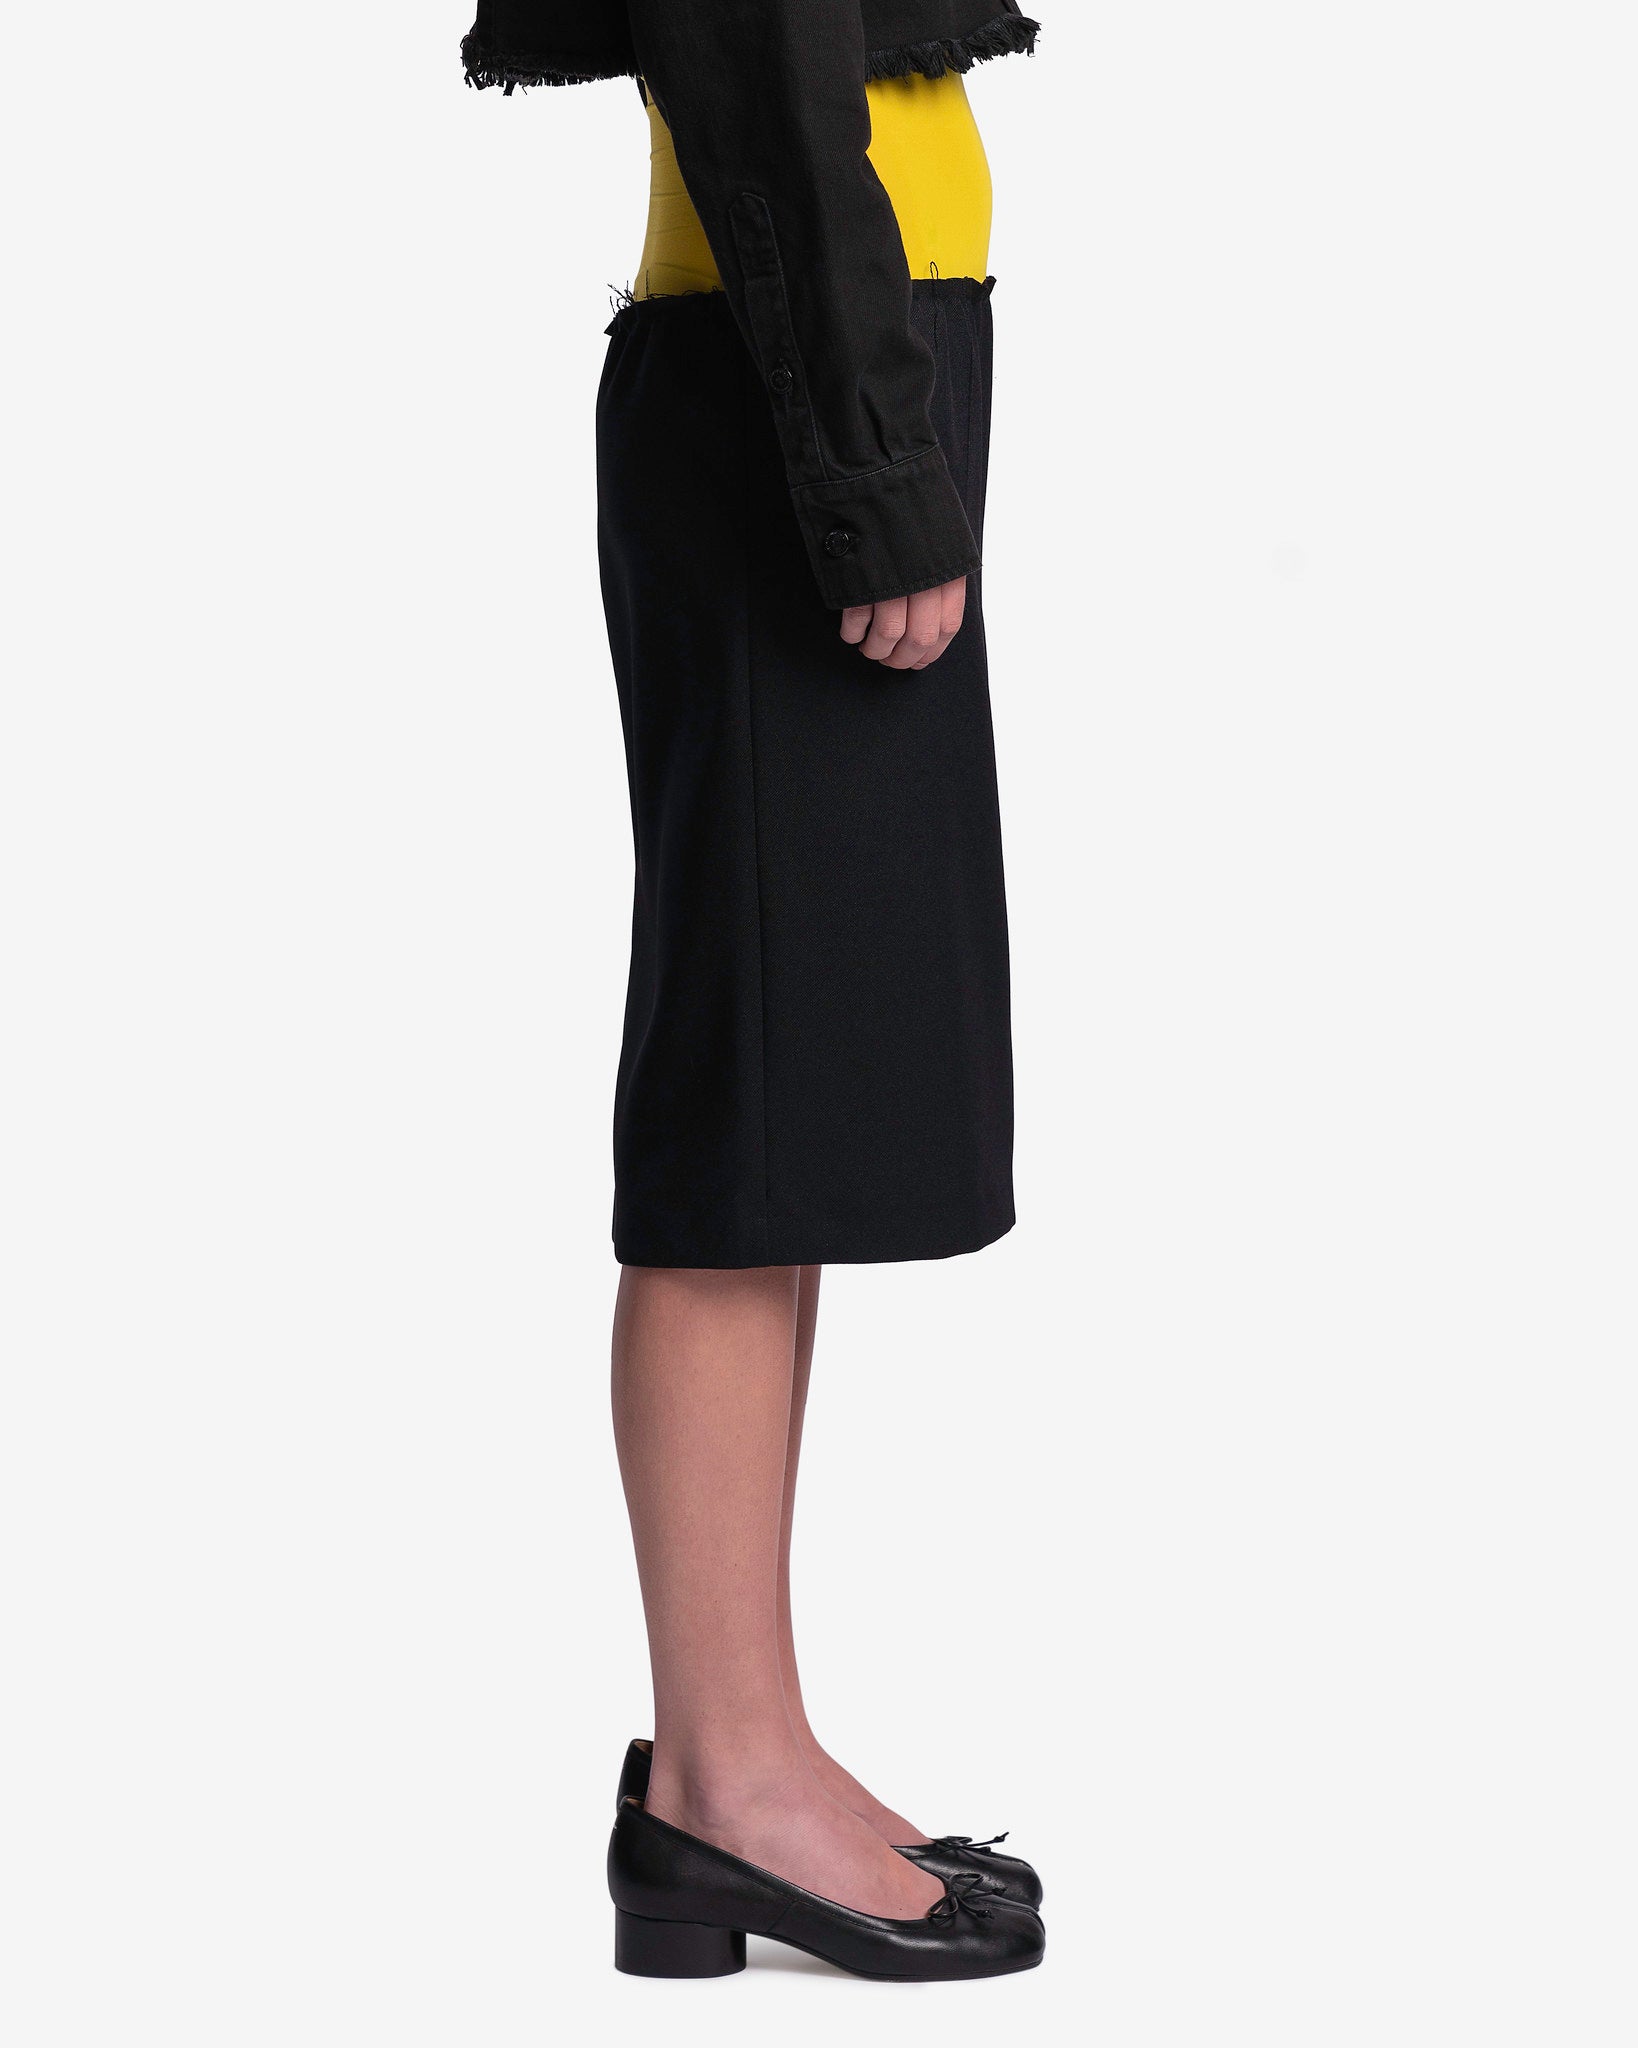 Raf Simons Women Skirts Pencil Skirt with Stocking at Waist in Black/Yellow